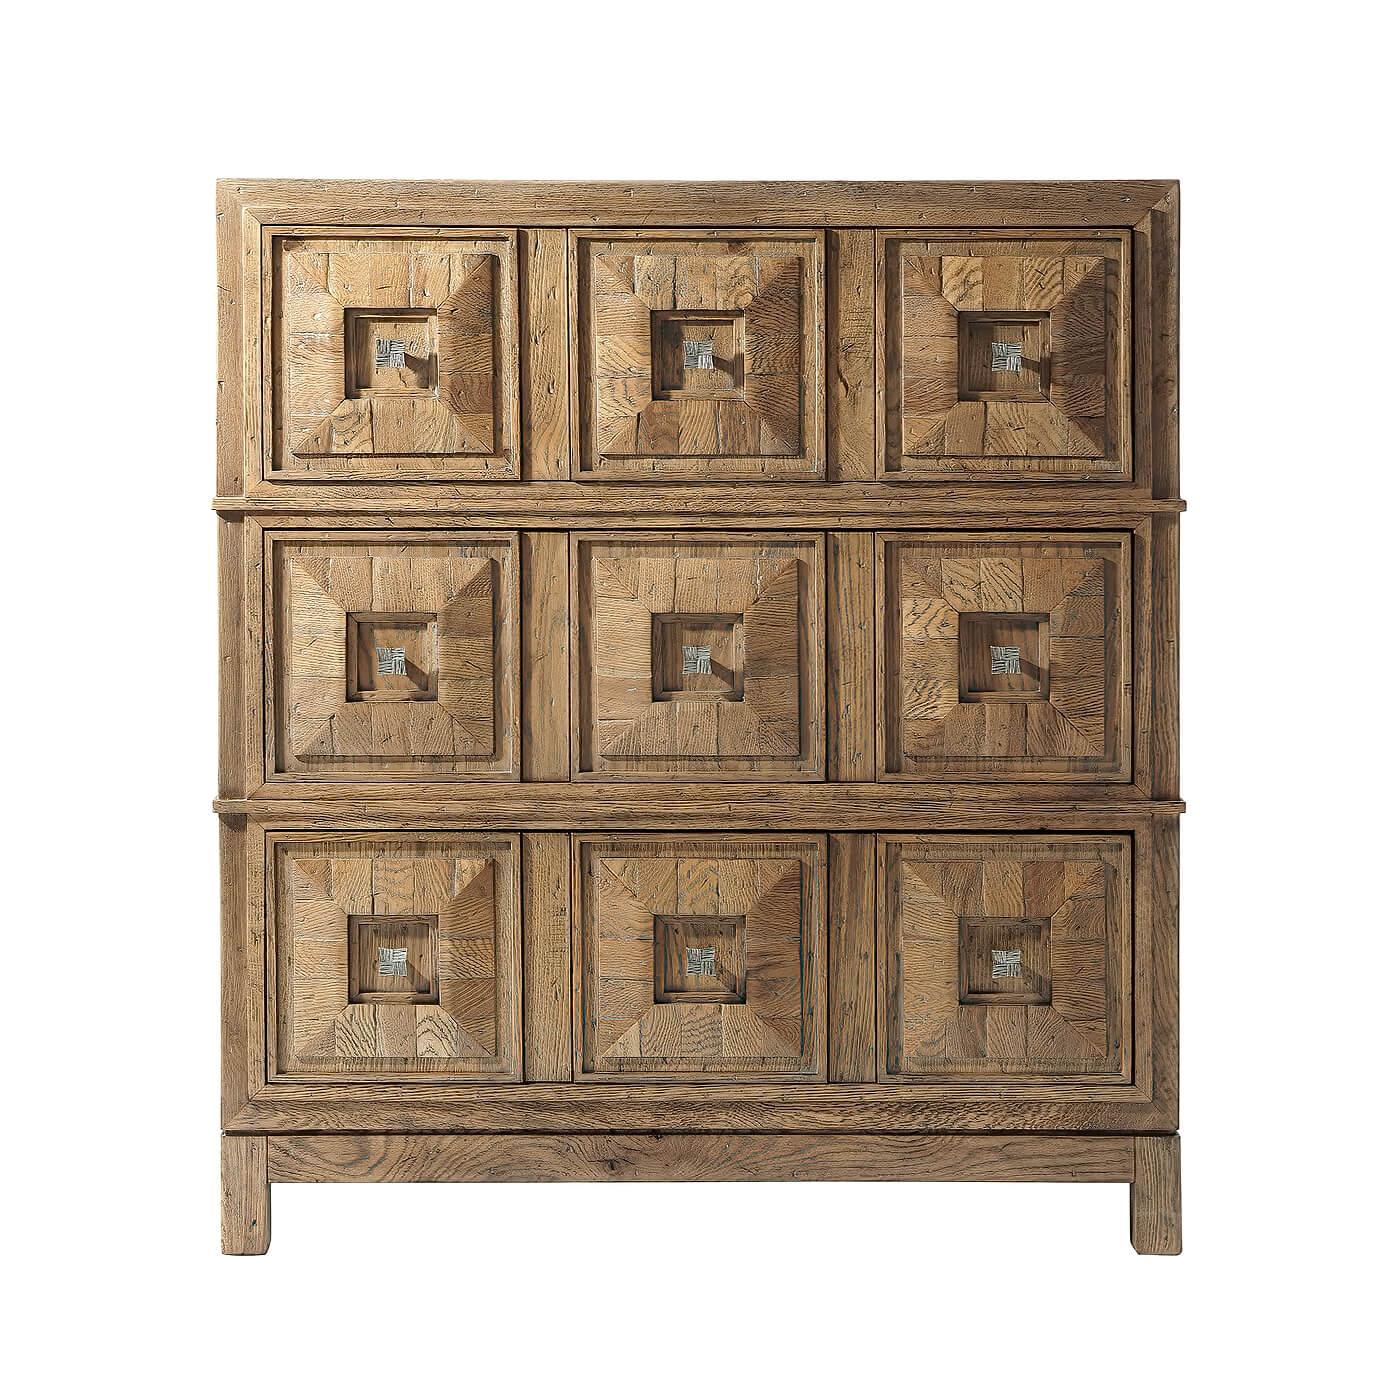 Modern rustic dresser in light echo oak finish, with planked parquetry top and sides. This dresser has three triple coffered drawers accented with vintage textured metal knobs. 

Dimensions: 40.75